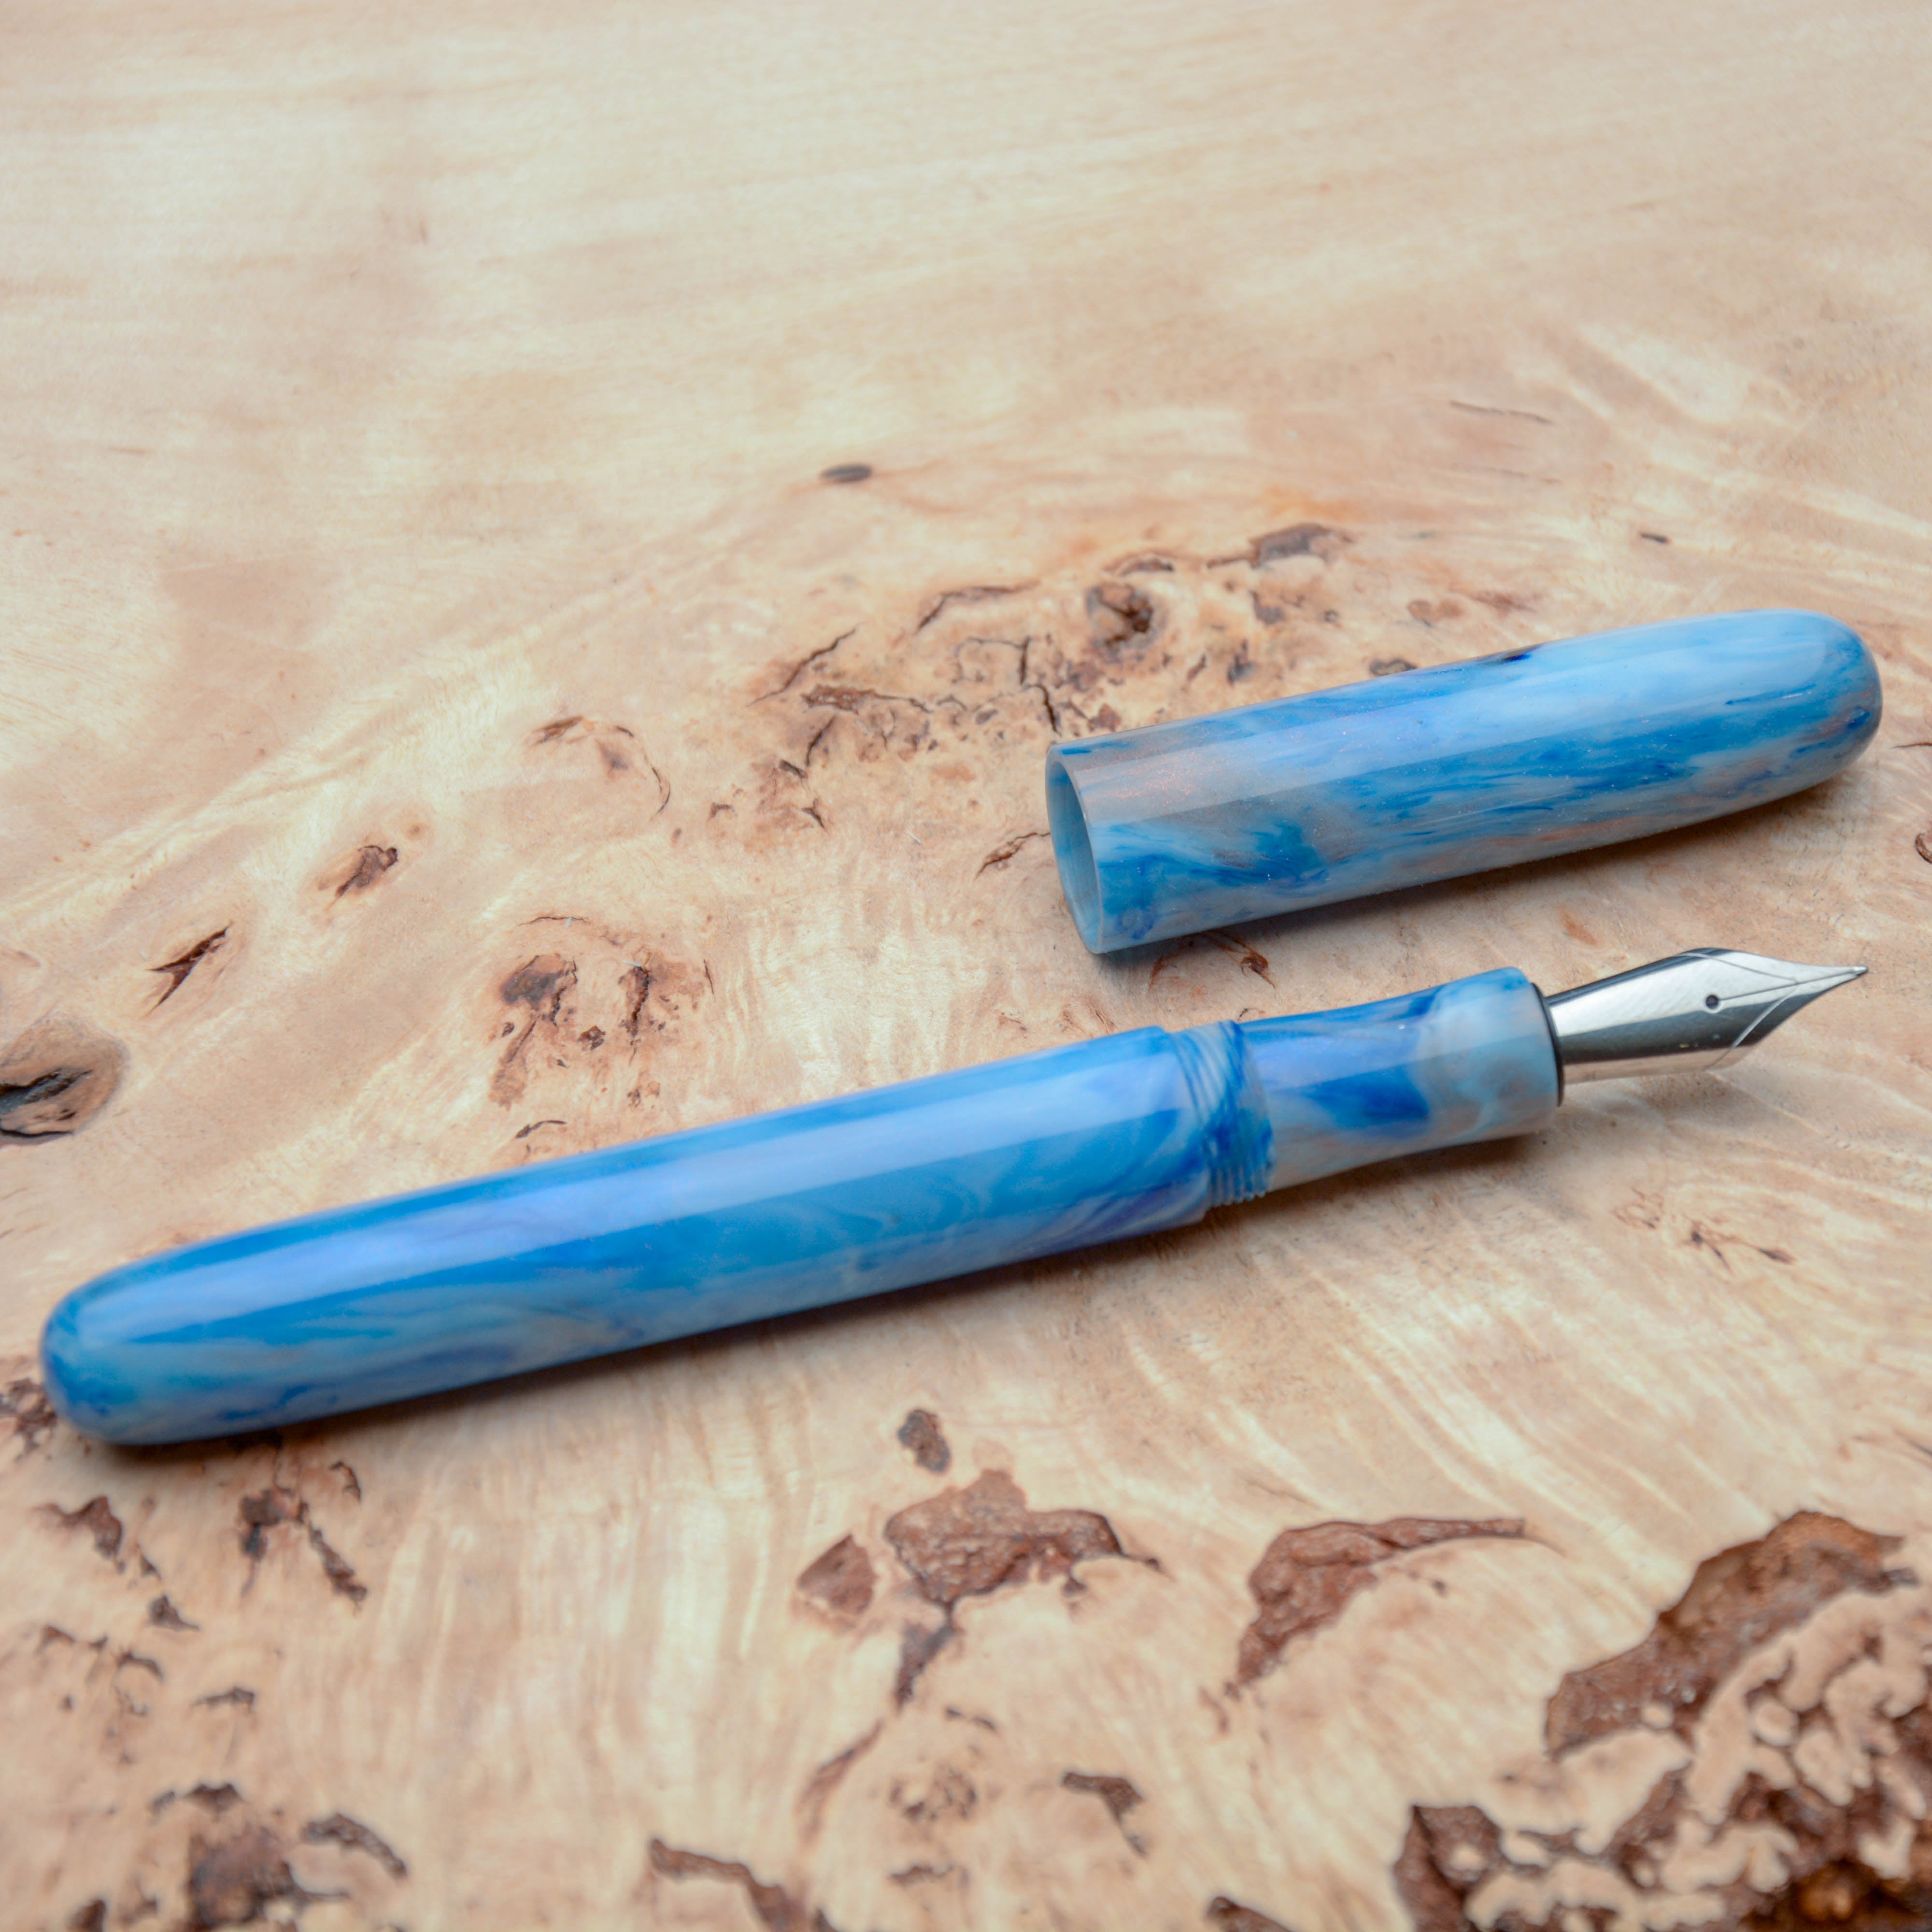 Fountain Pen - JoWo #6 - 13 mm - In-house material with swirls of white, blue and copper